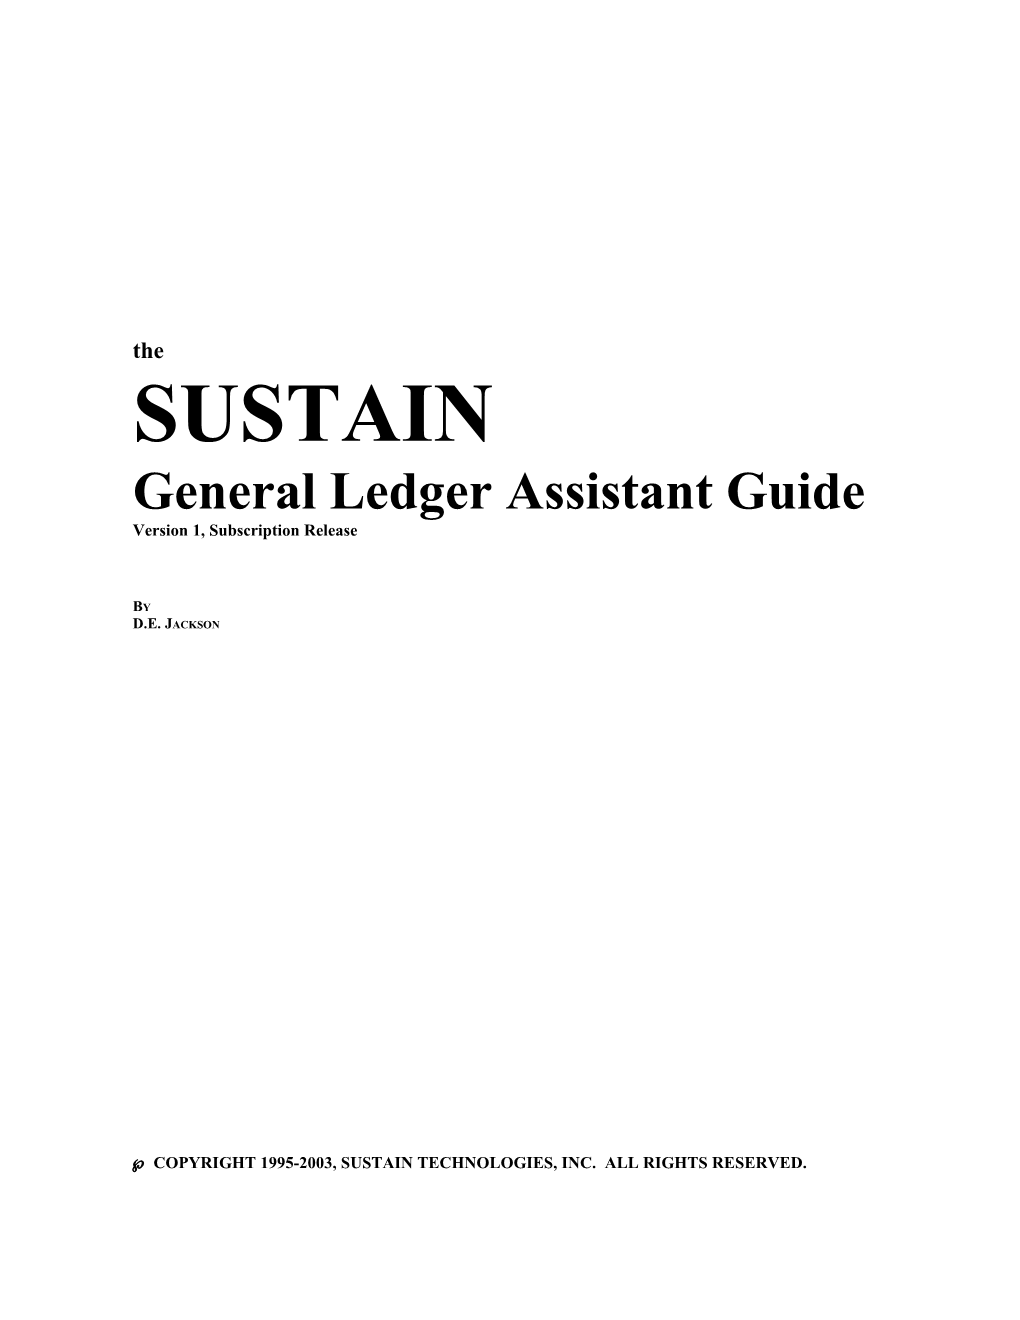 The SUSTAIN General Ledger Assistant Guide